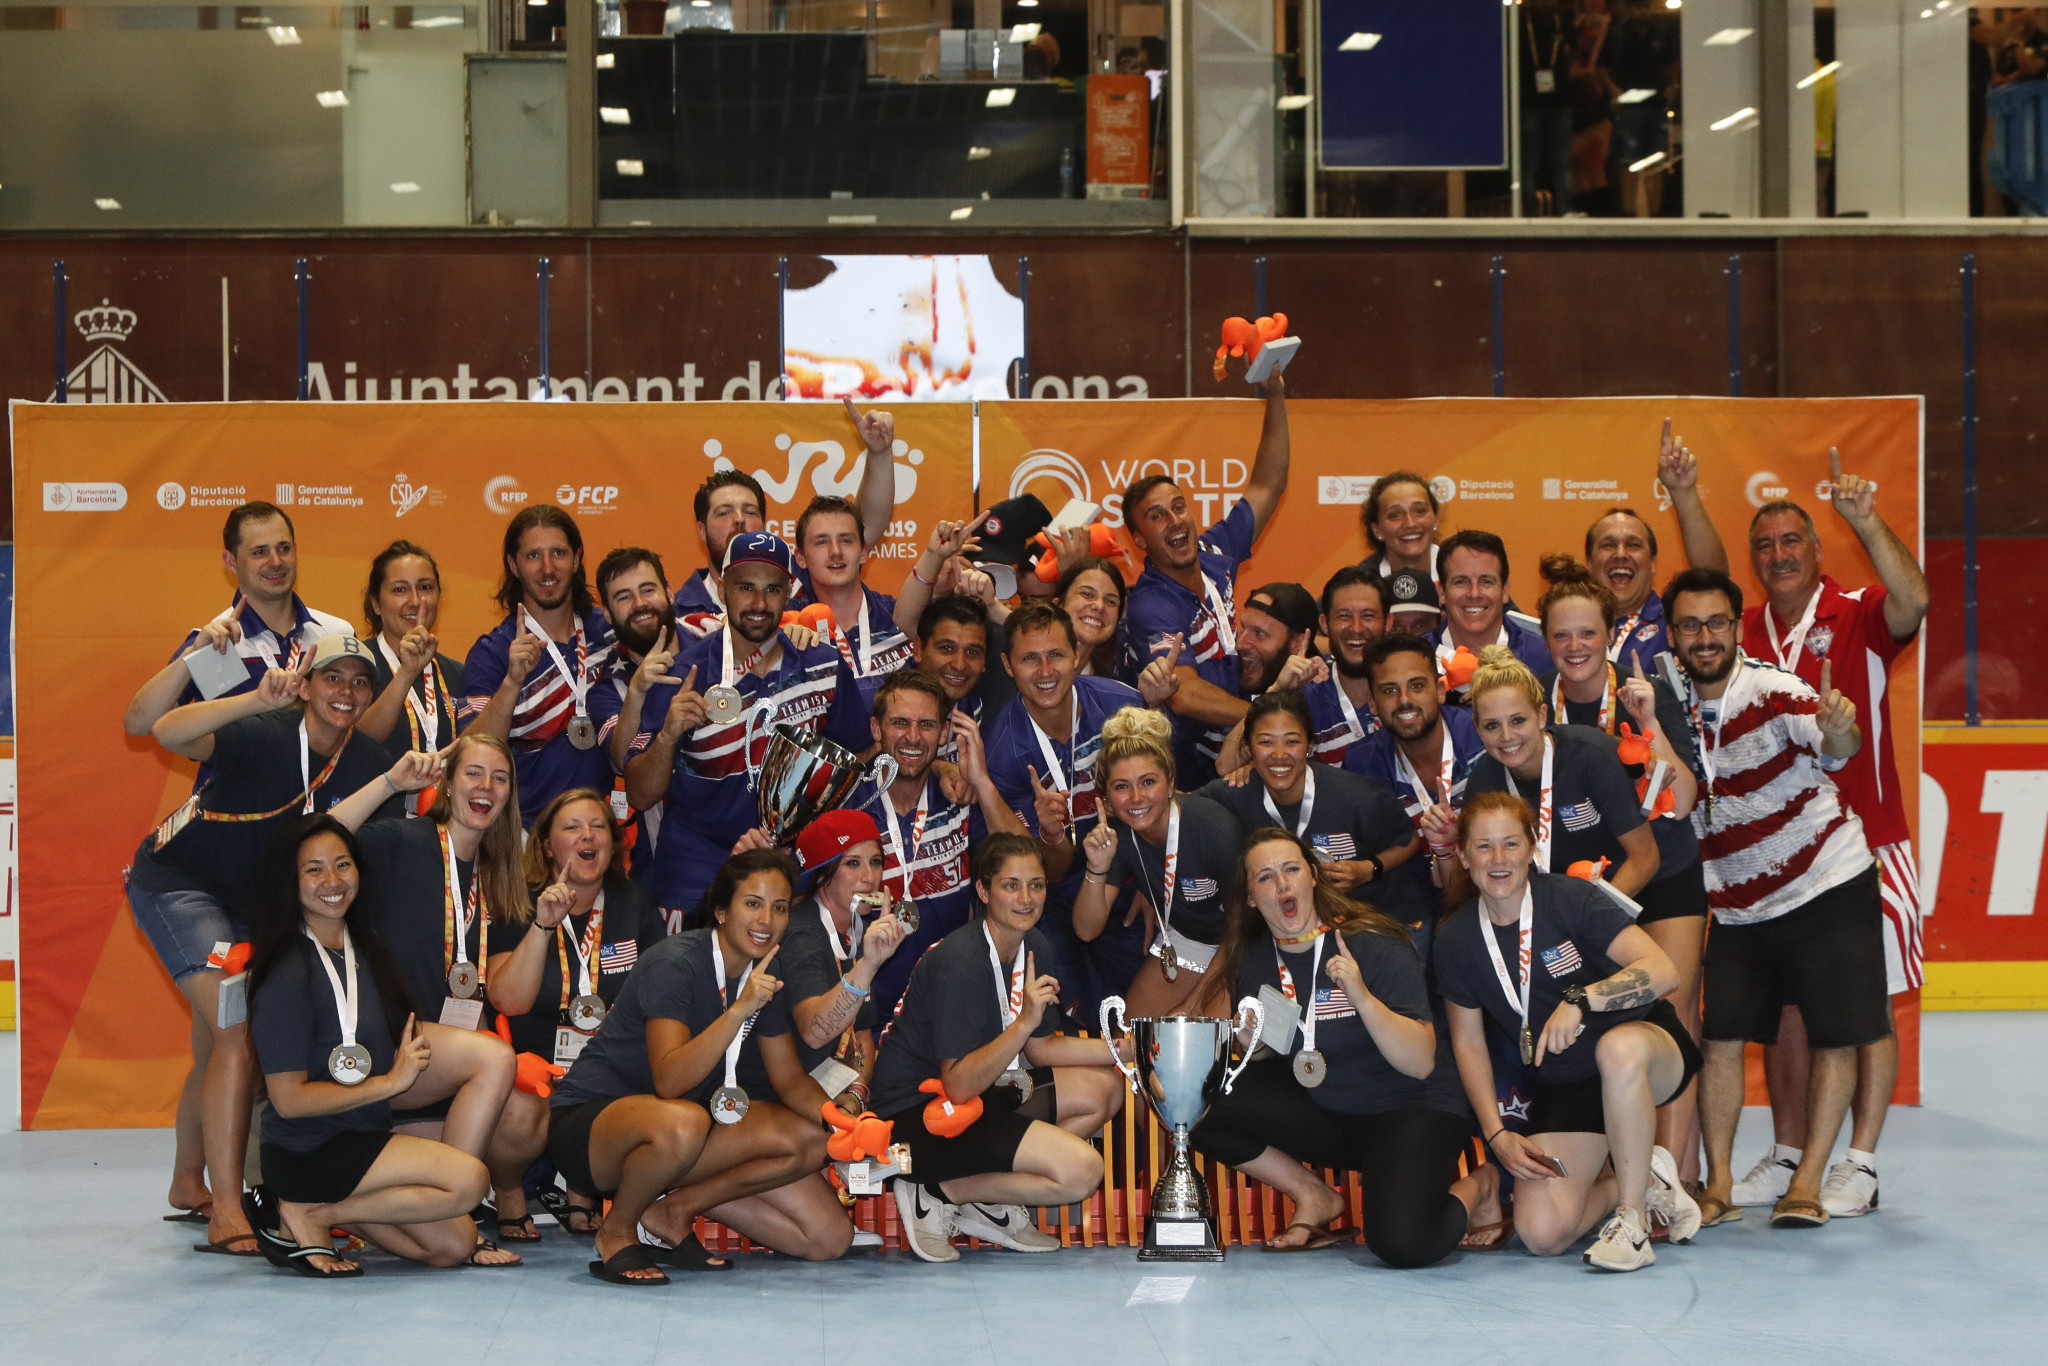 United States sweep inline hockey and roller derby golds at World Roller Games